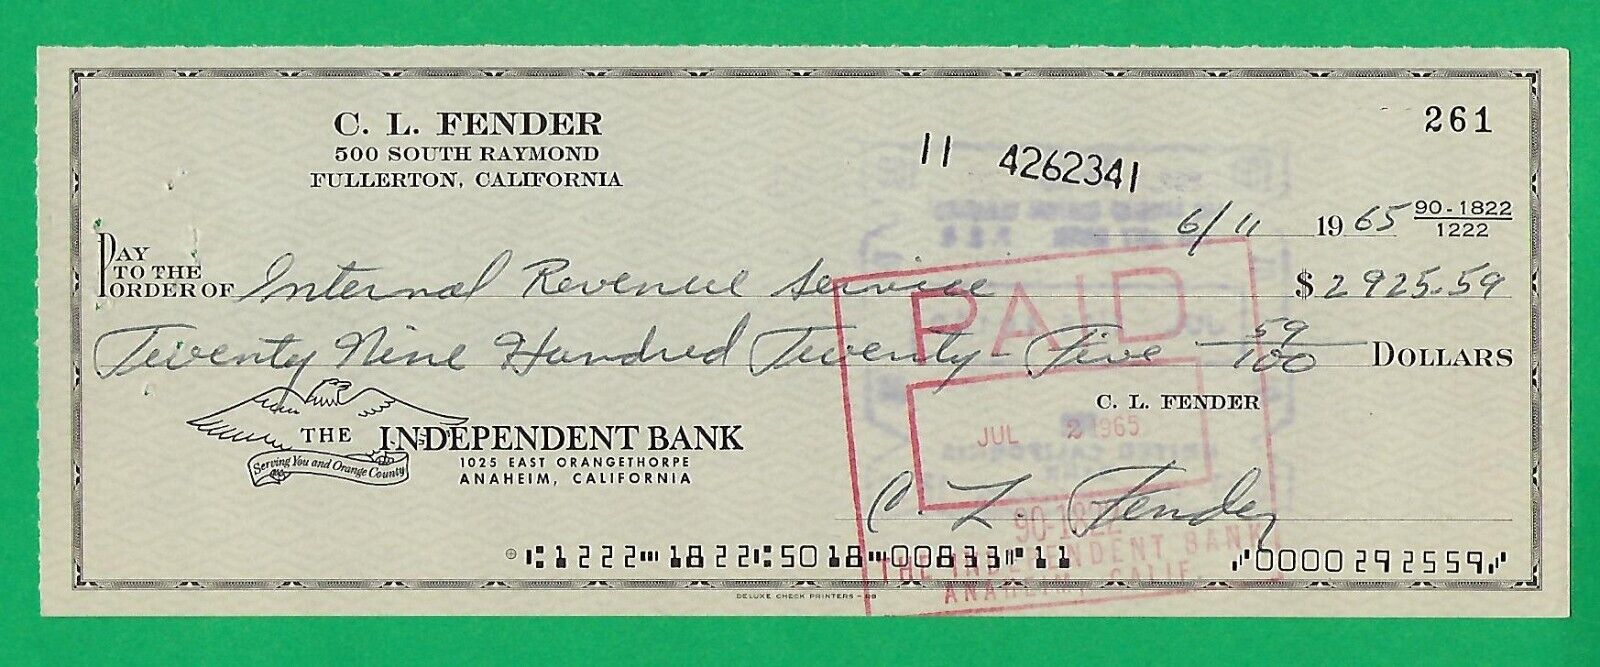 Leo Fender Signed 1965 Business Check Made To IRS Internal Revenue Service $SALE